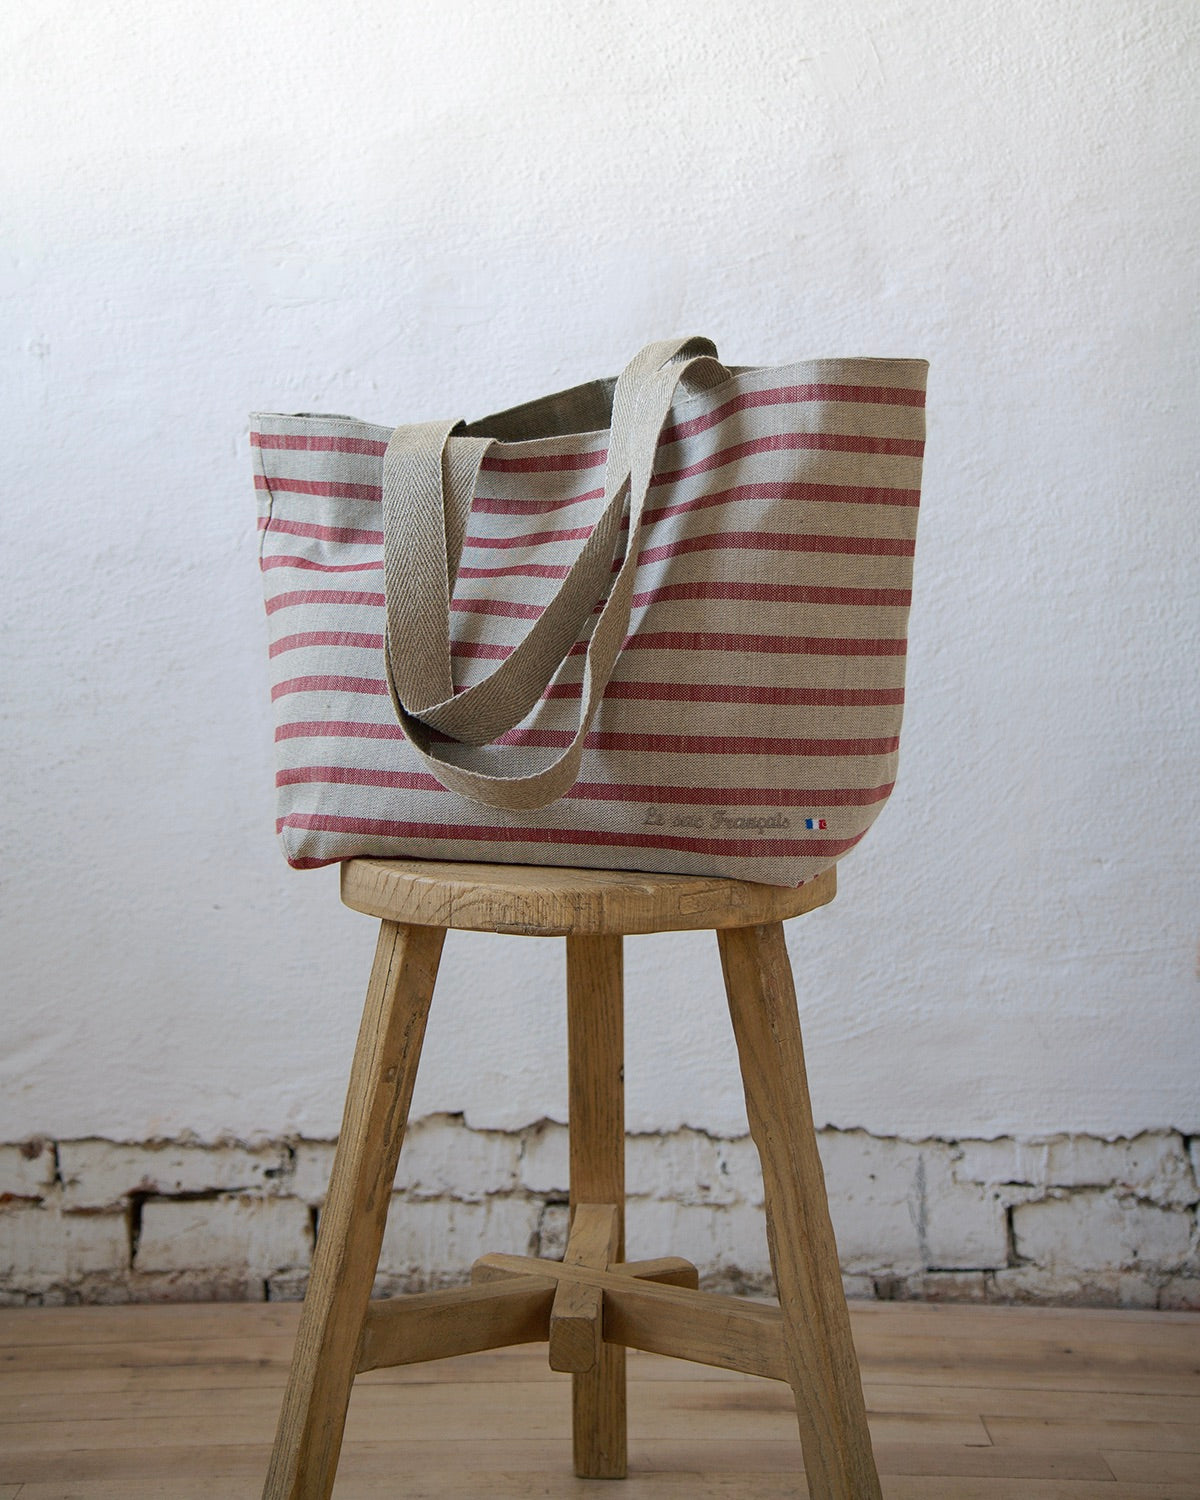 French Made Stripe Linen Tote - Reversible!